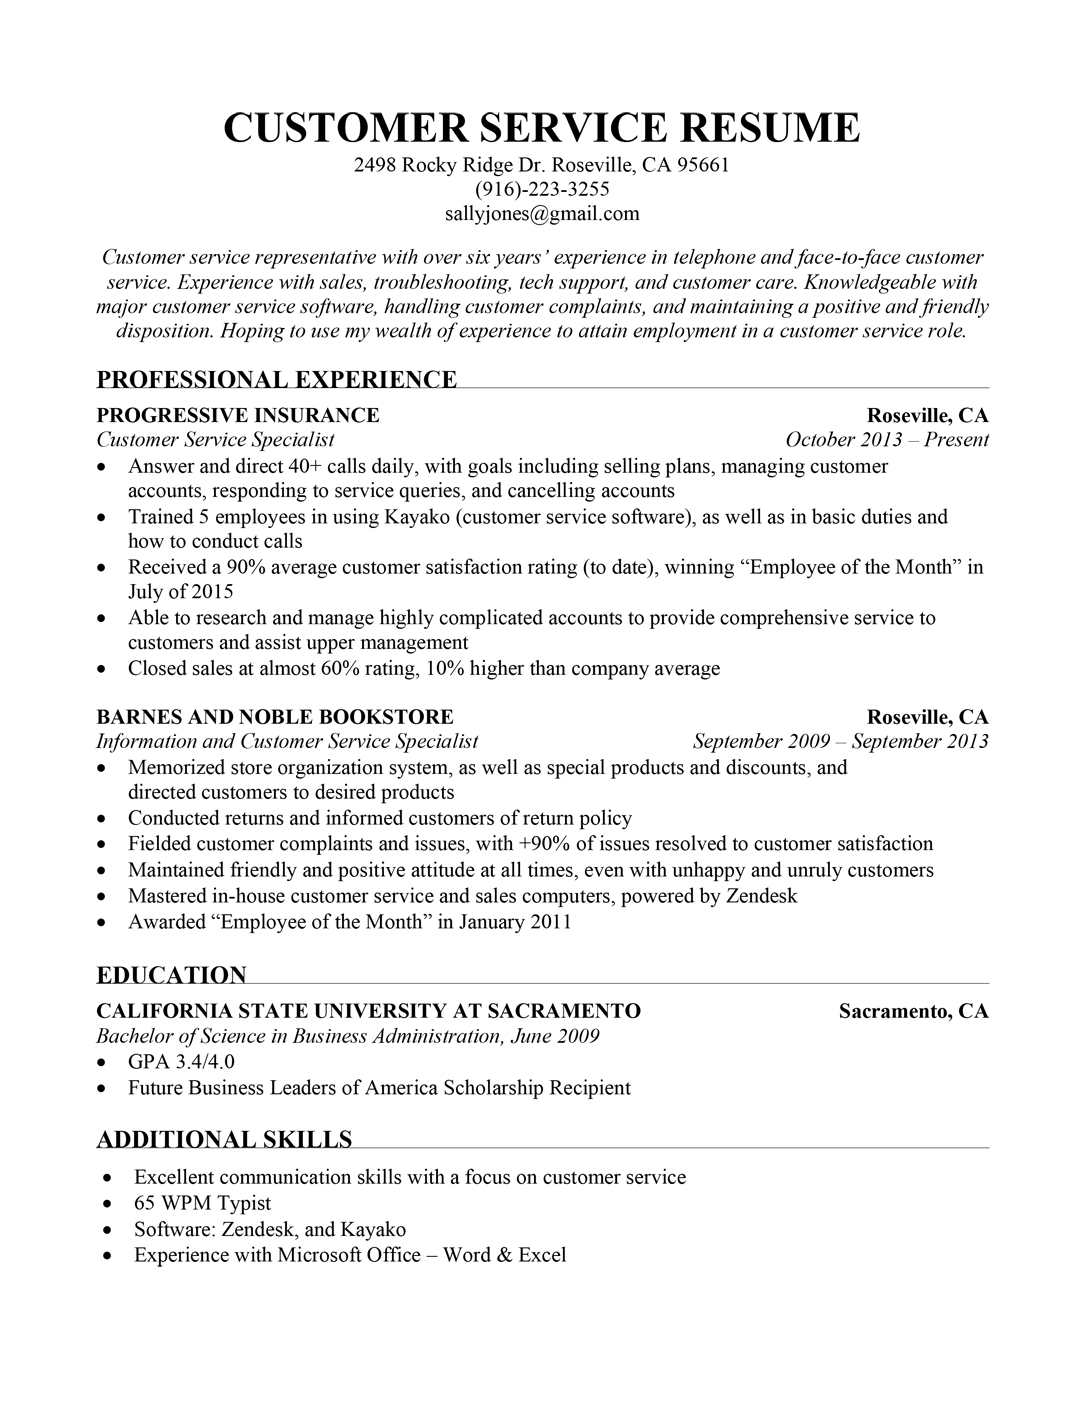 Open Mike on RESUME